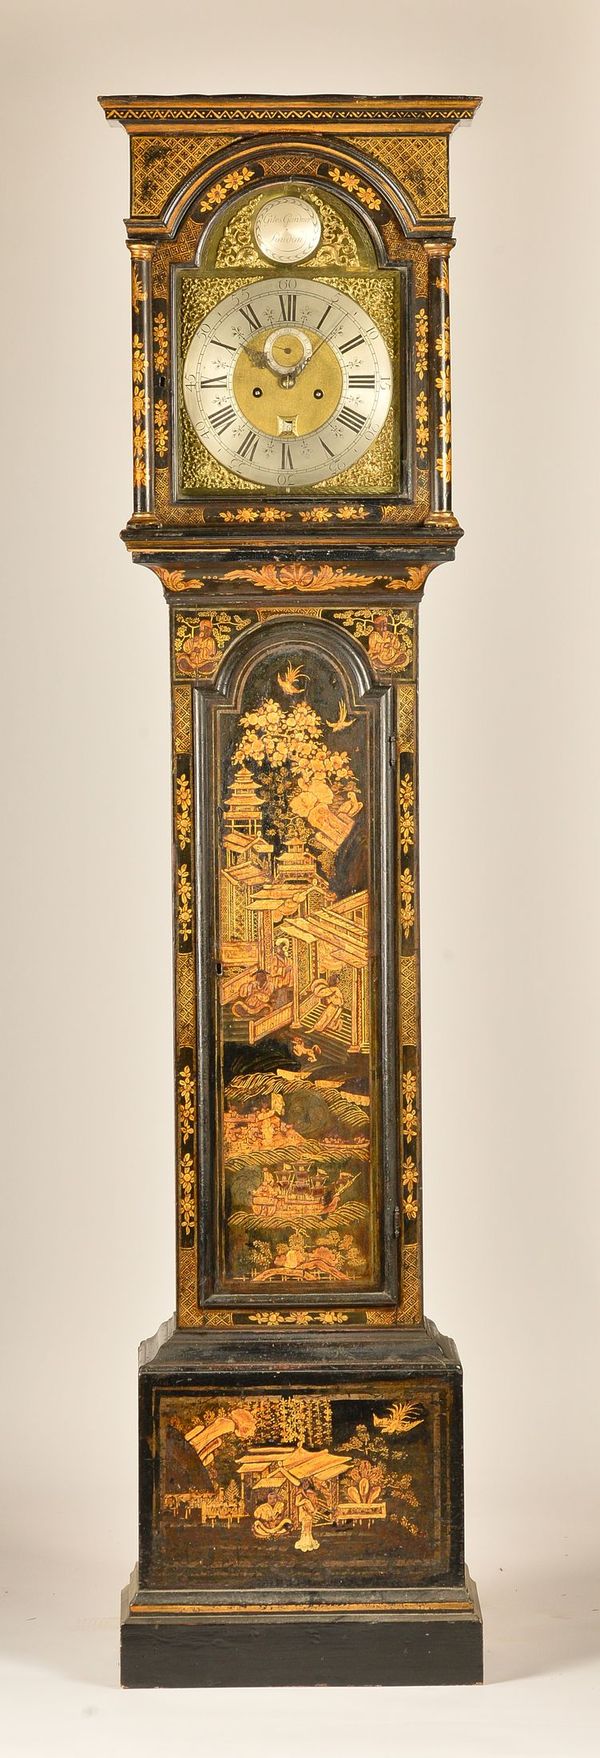 A GEORGE II PARCEL-GILT CHINOISERIE DECORATED STRIKING LONGCASE CLOCK